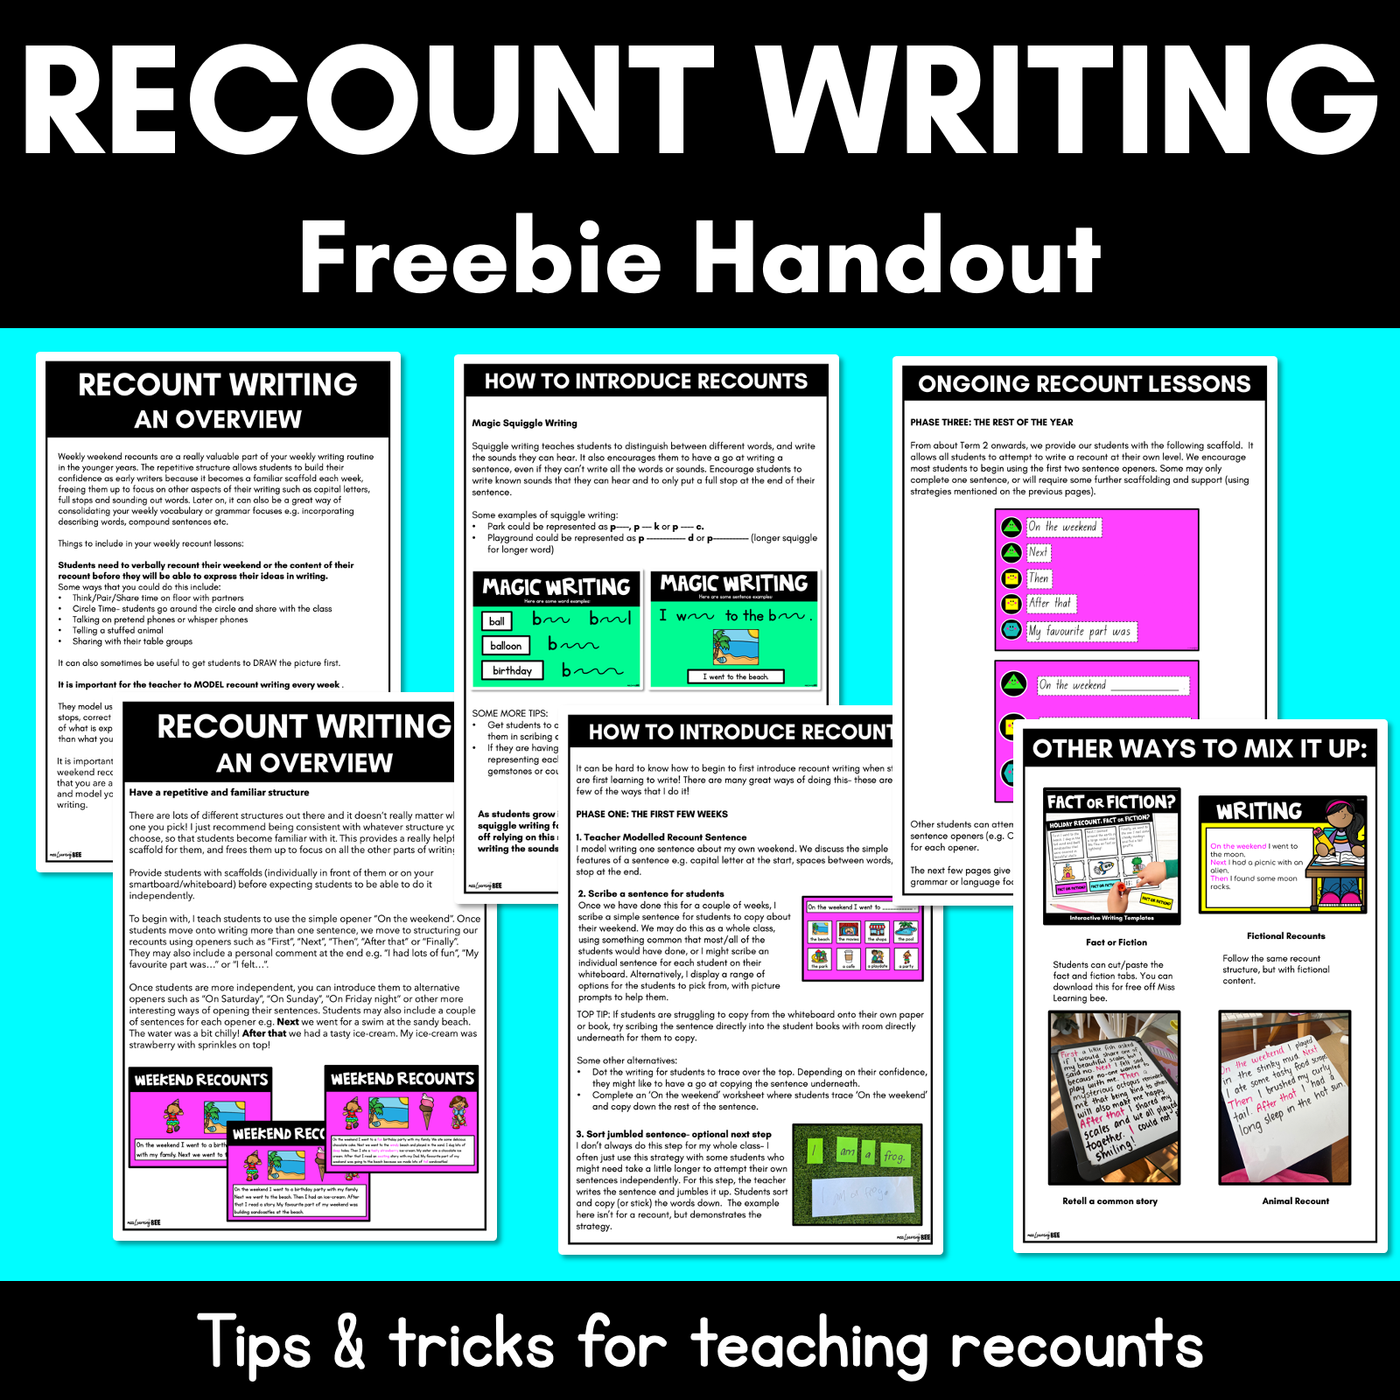 How To Teach Recount Writing | A Free Guide